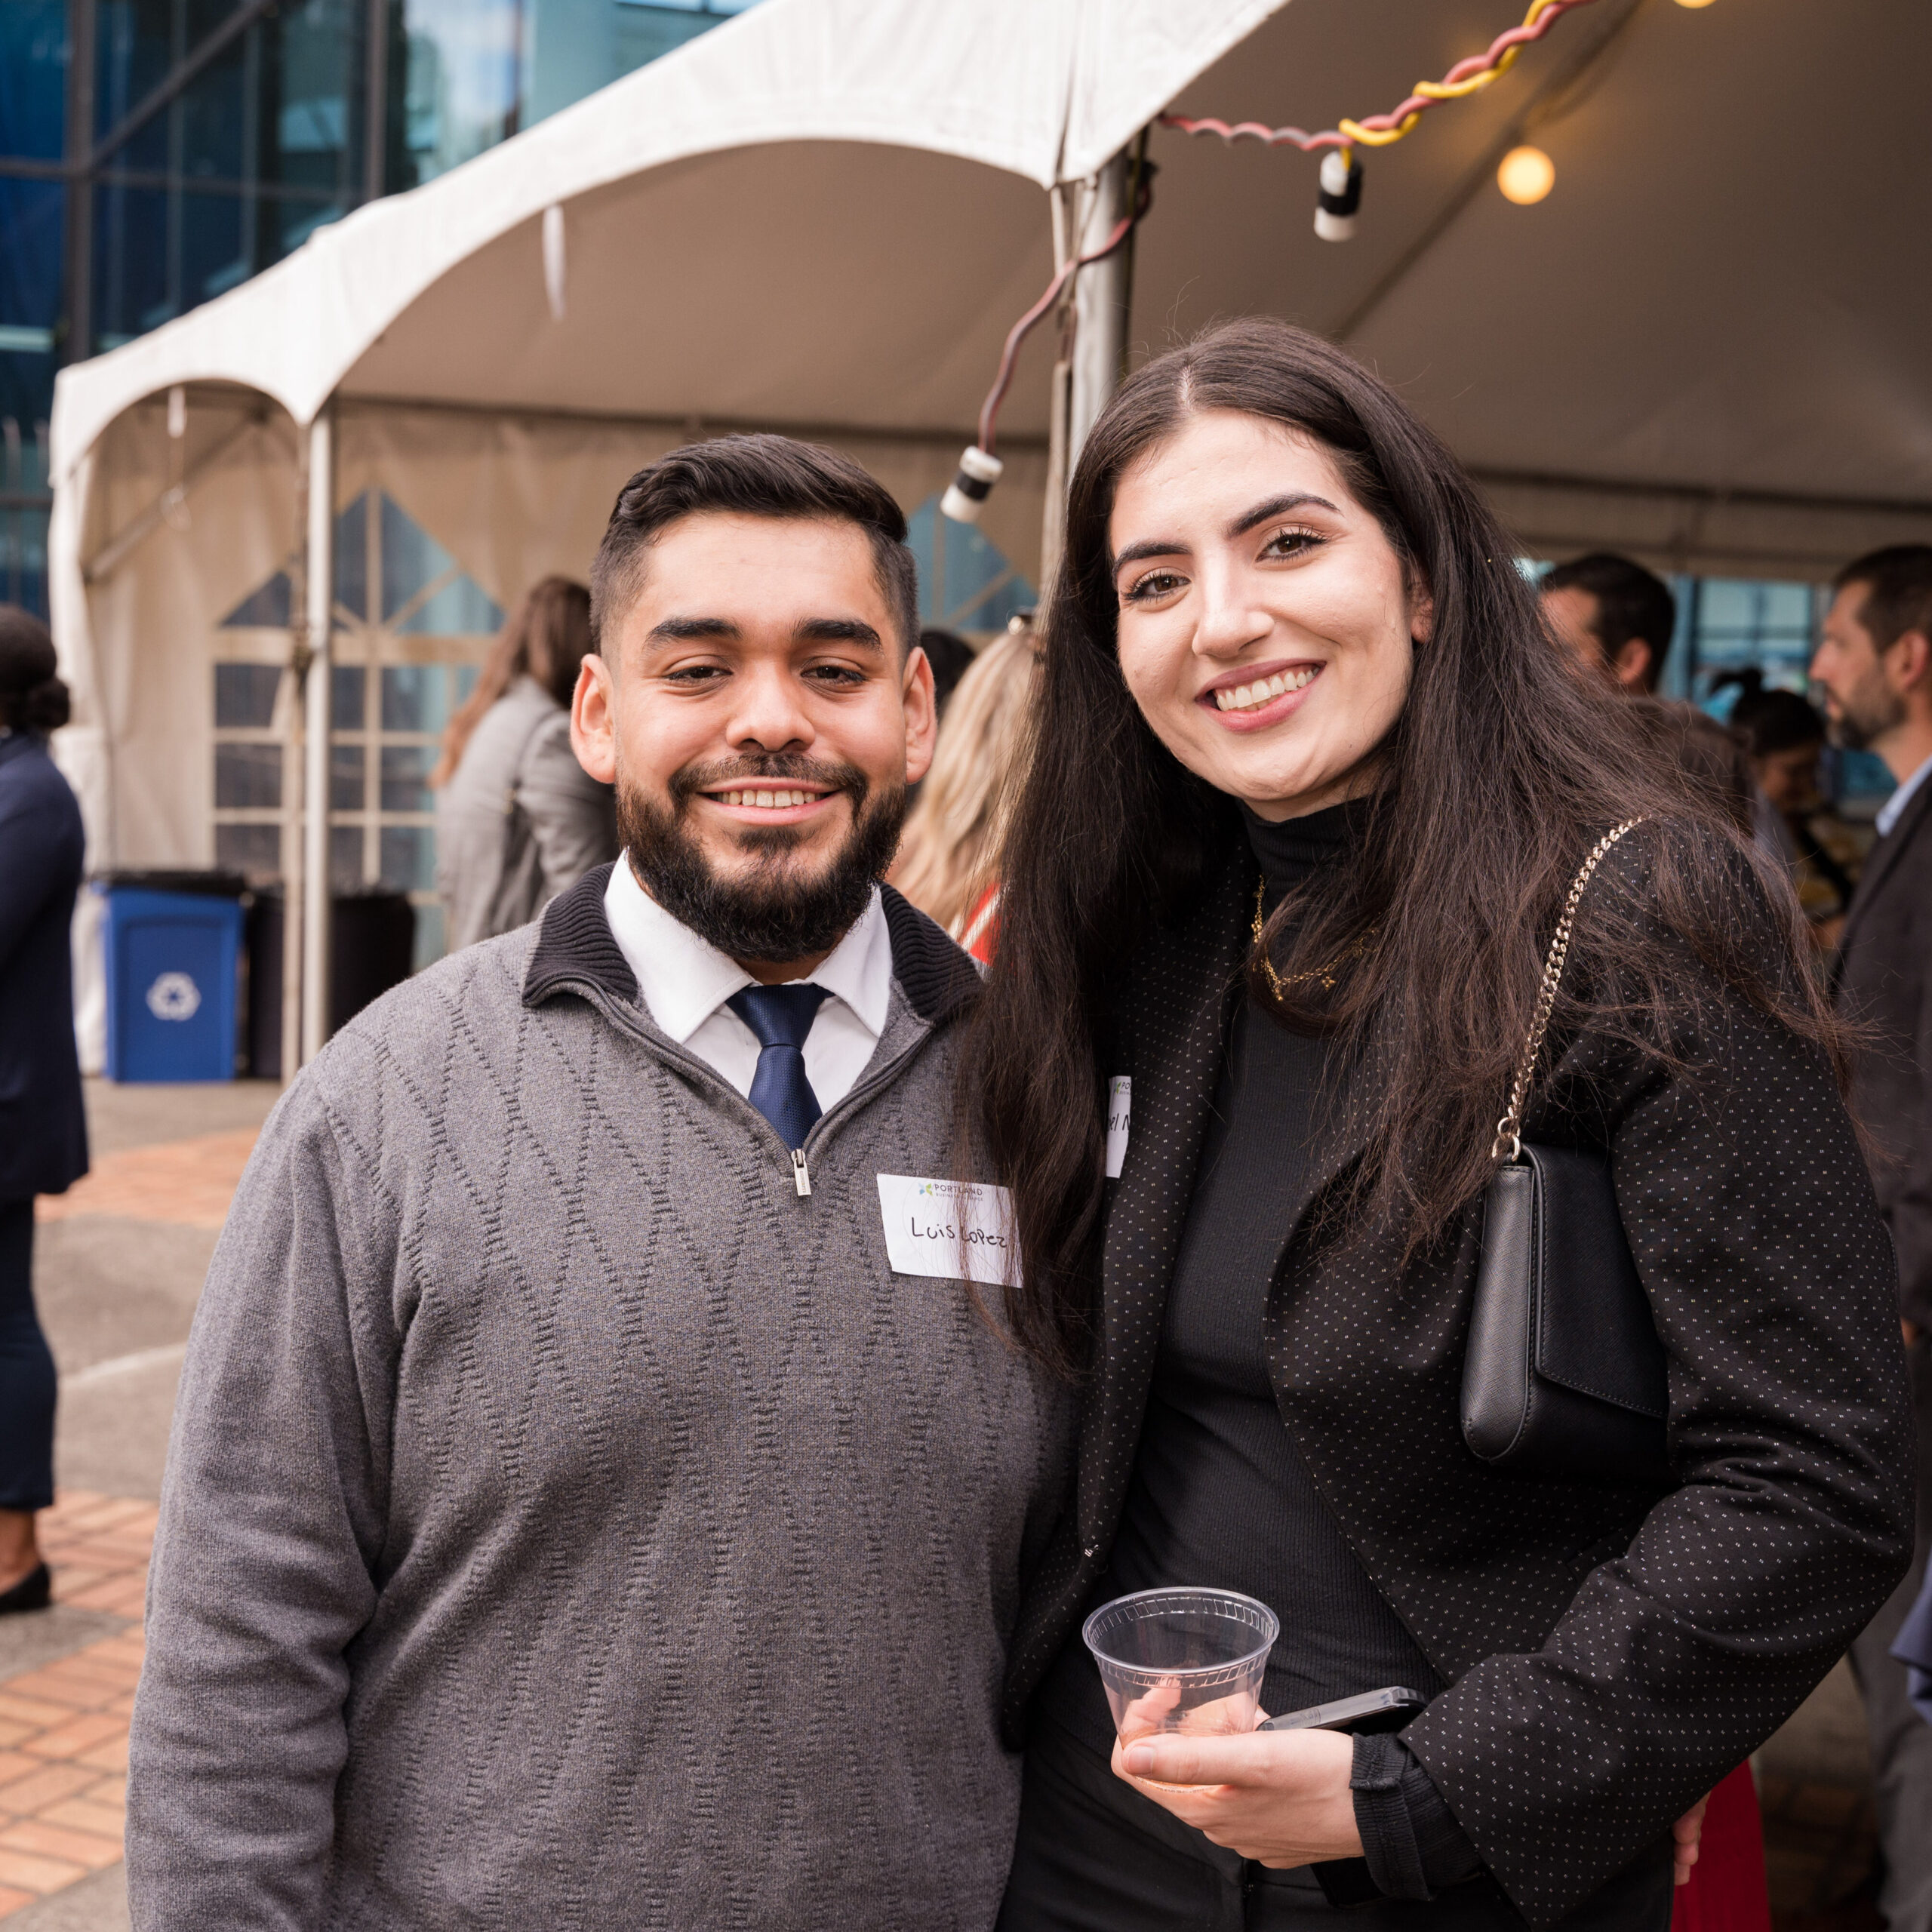 Two friends pose for a picture together smiling at a Chamber event